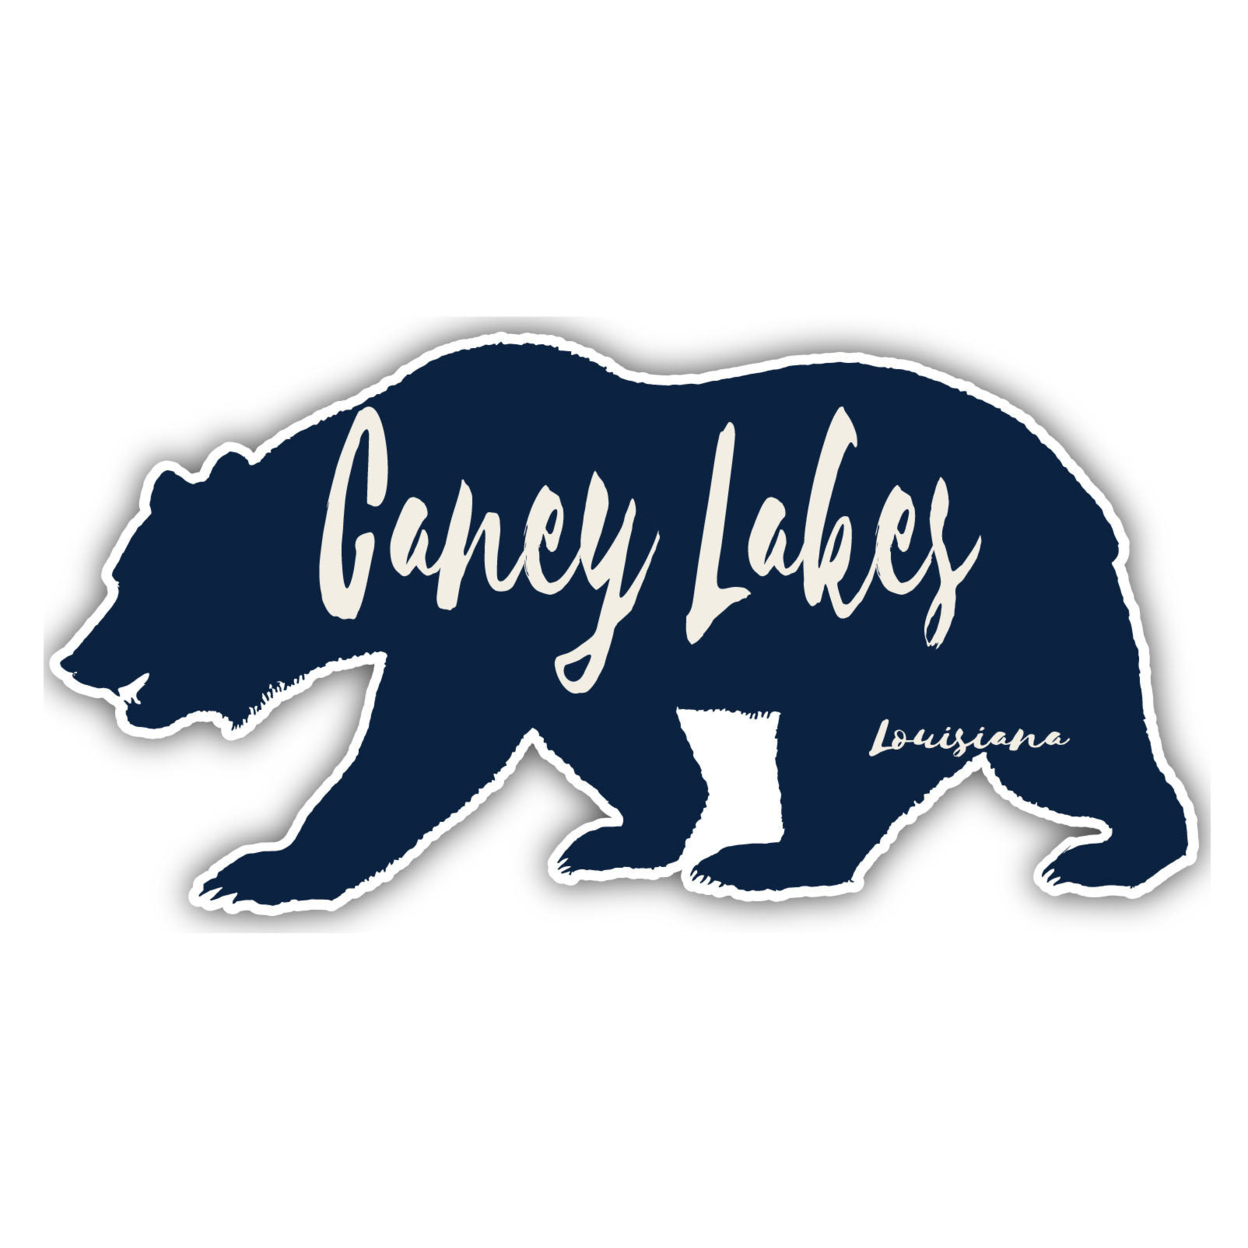 Caney Lakes Louisiana Souvenir Decorative Stickers (Choose Theme And Size) - 4-Pack, 2-Inch, Bear